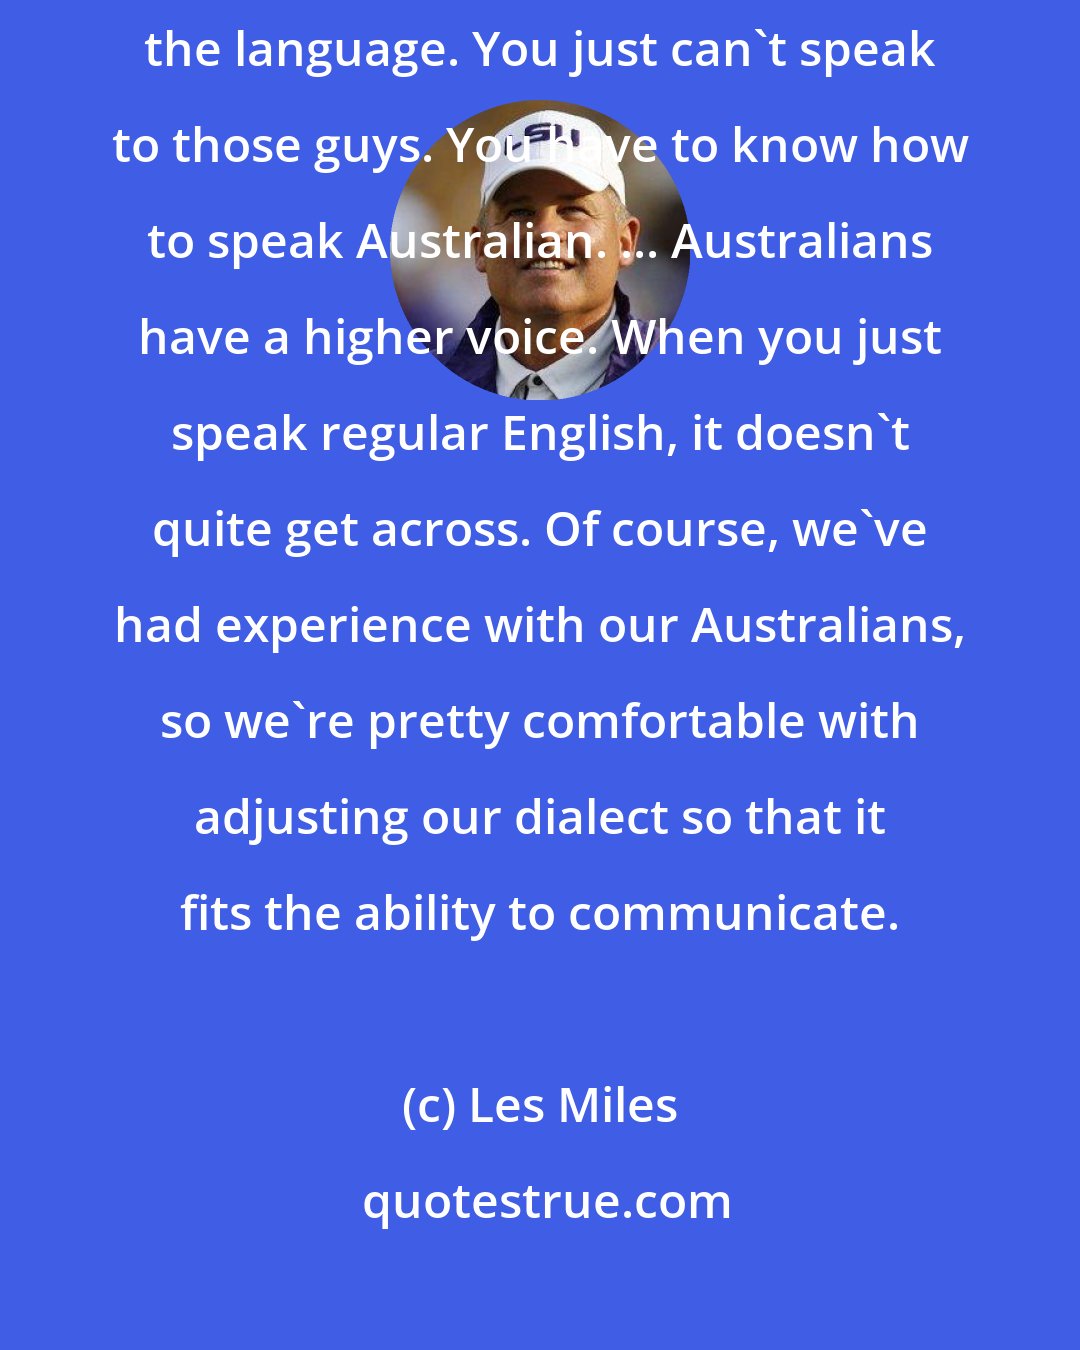 Les Miles: Jamie Keehn, our second Australian punter. Again, you have to learn the language. You just can't speak to those guys. You have to know how to speak Australian. ... Australians have a higher voice. When you just speak regular English, it doesn't quite get across. Of course, we've had experience with our Australians, so we're pretty comfortable with adjusting our dialect so that it fits the ability to communicate.